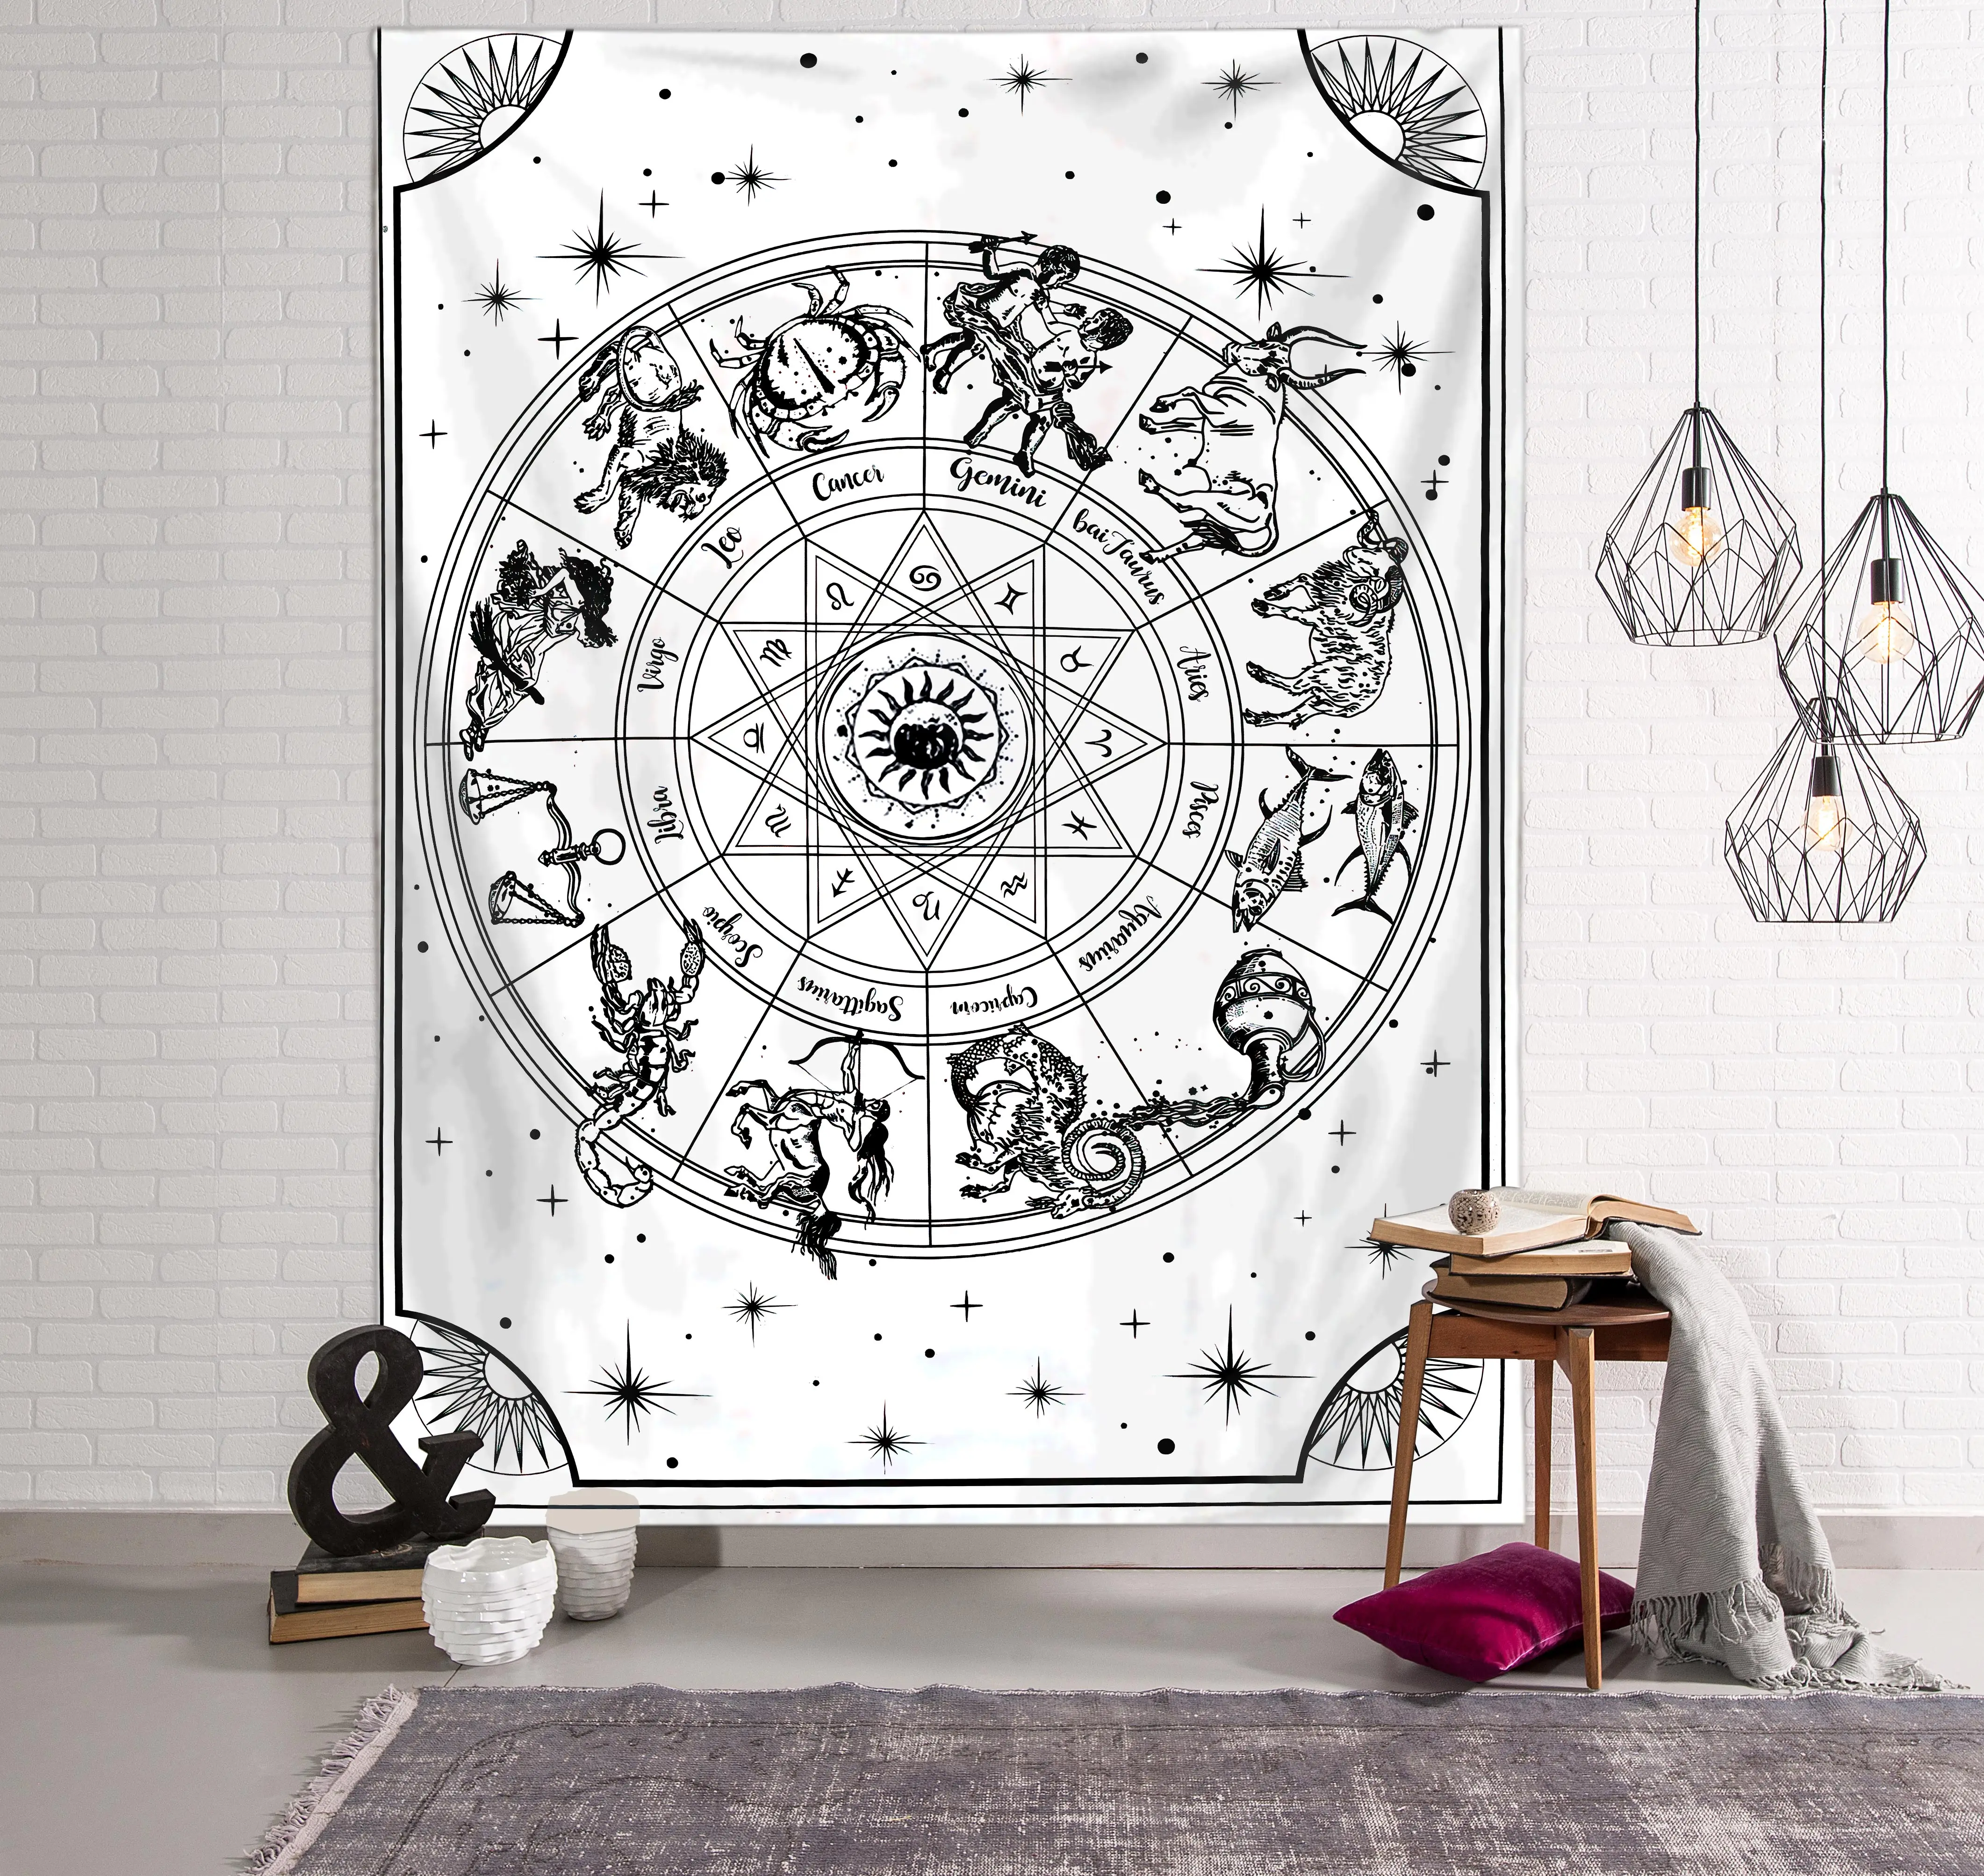 

Made Background Decorative Cloth Mandala Home Use Tapestry With Factory Price Indian style